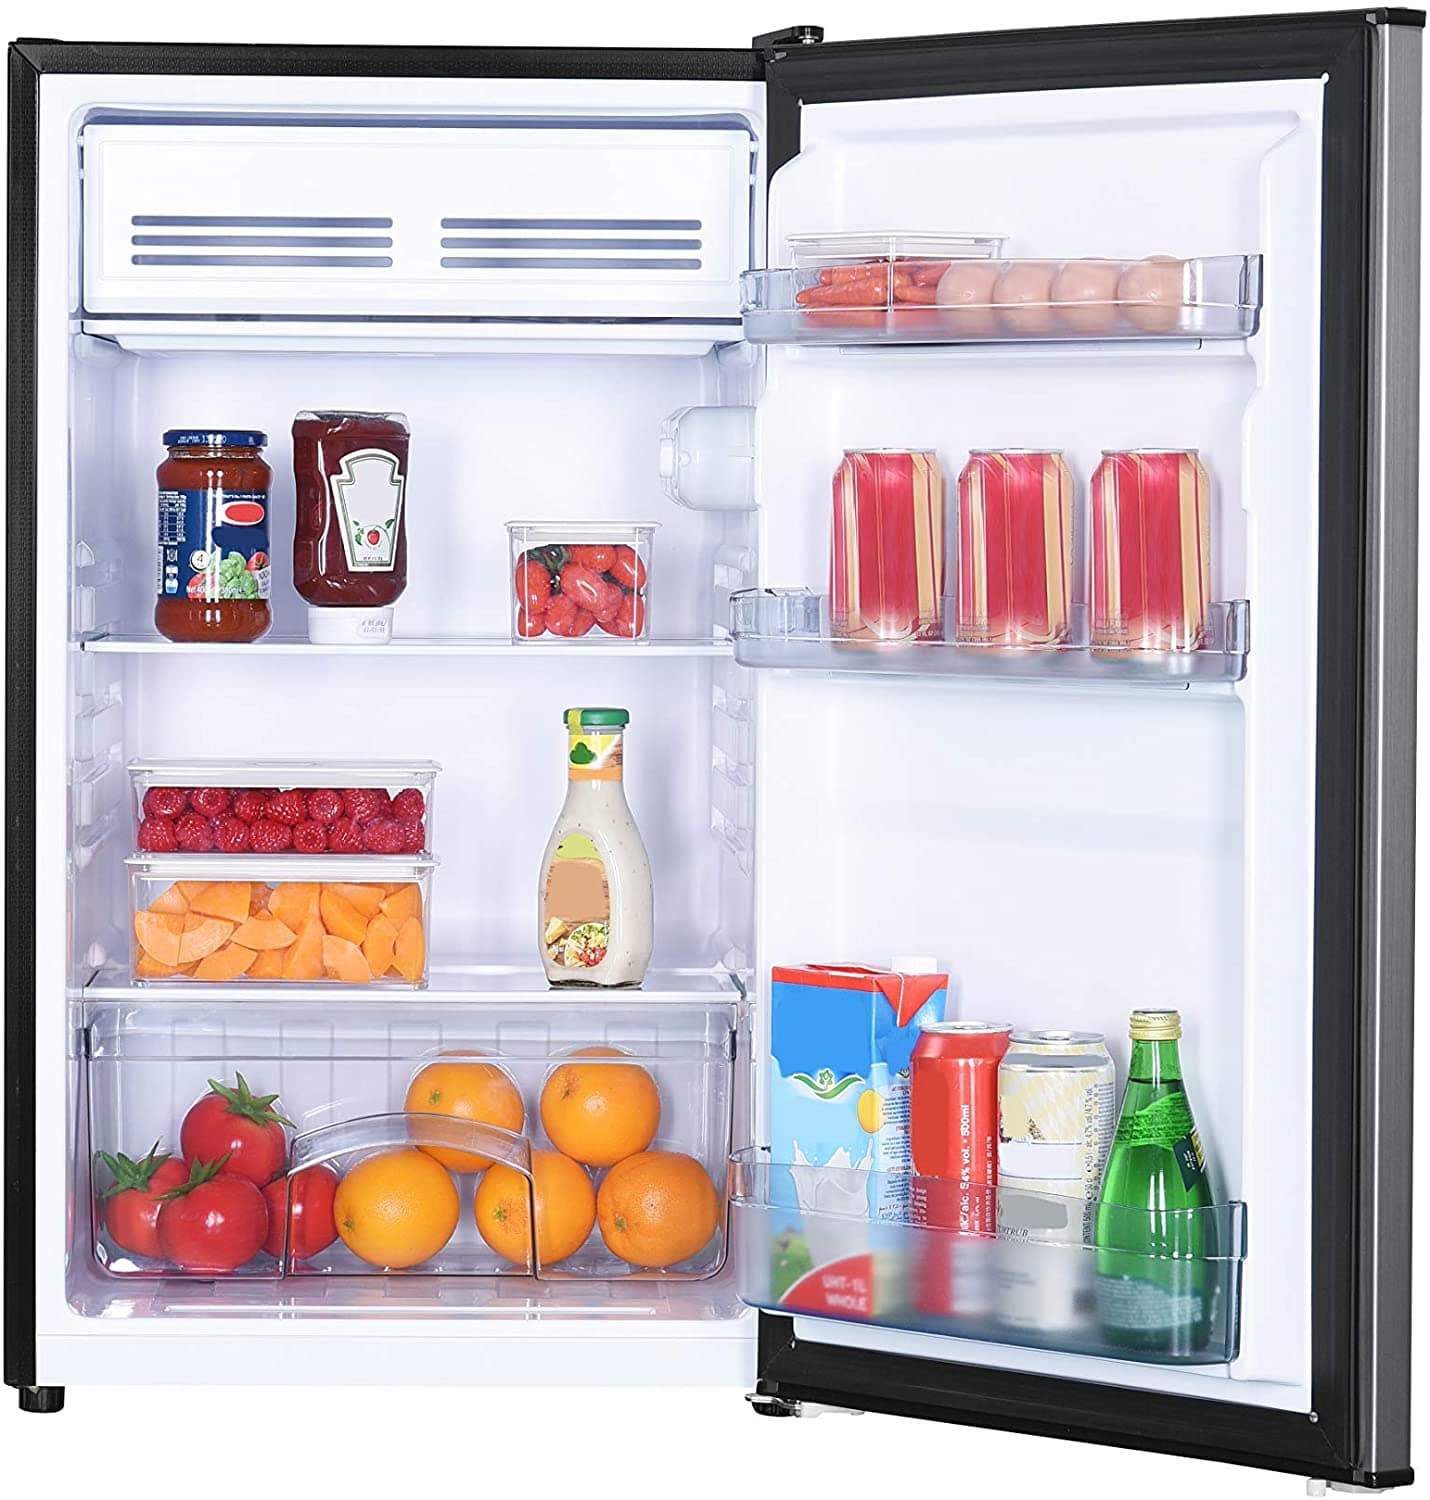 Danby Compact Danby - 4.4 CuFt. Refrigerator, Push Button Defrost, Full Width Freezer Section